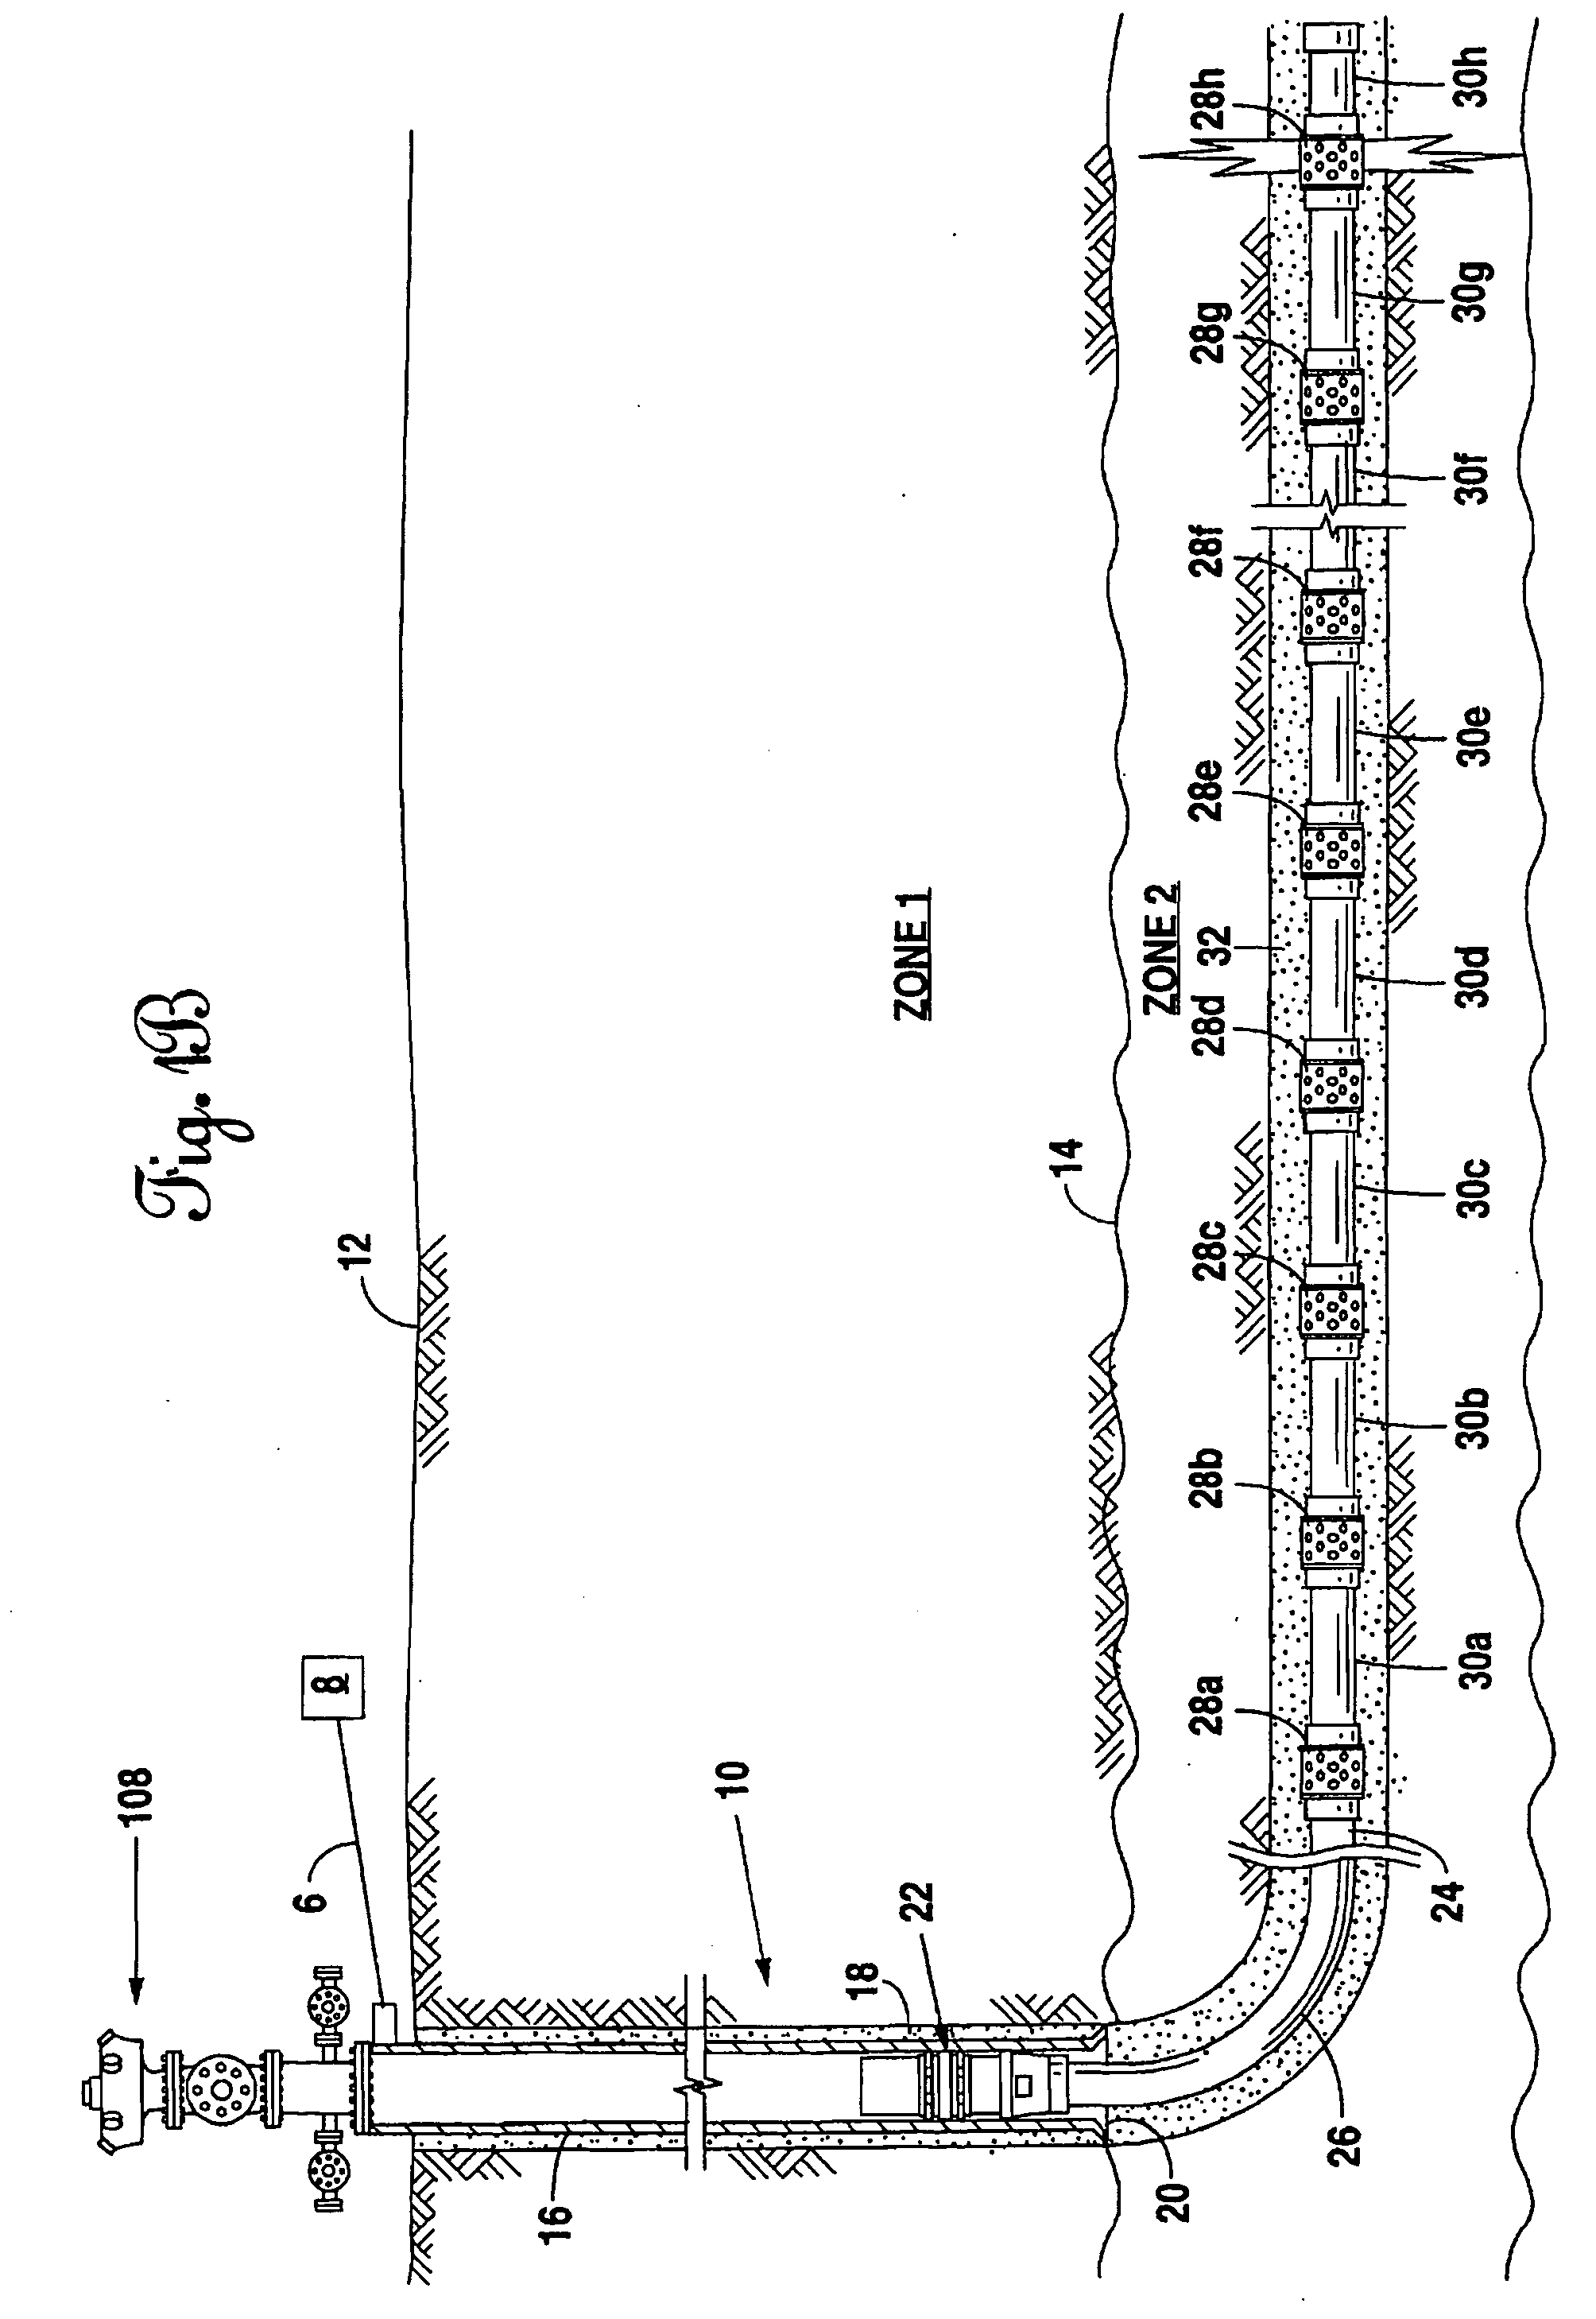 Remotely operated selective fracing system